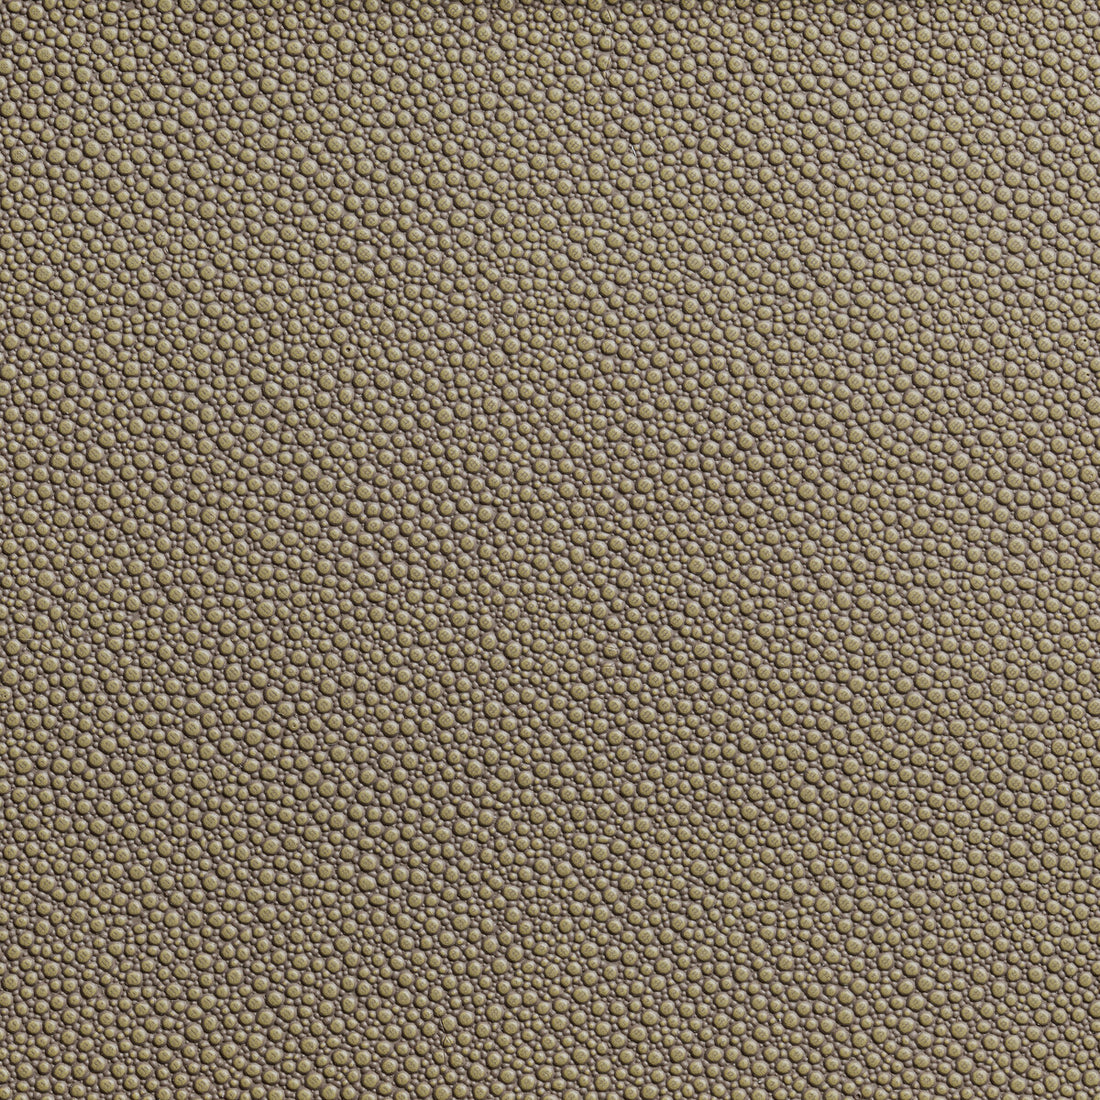 Fetch fabric in hemp color - pattern FETCH.106.0 - by Kravet Contract in the Foundations / Value collection